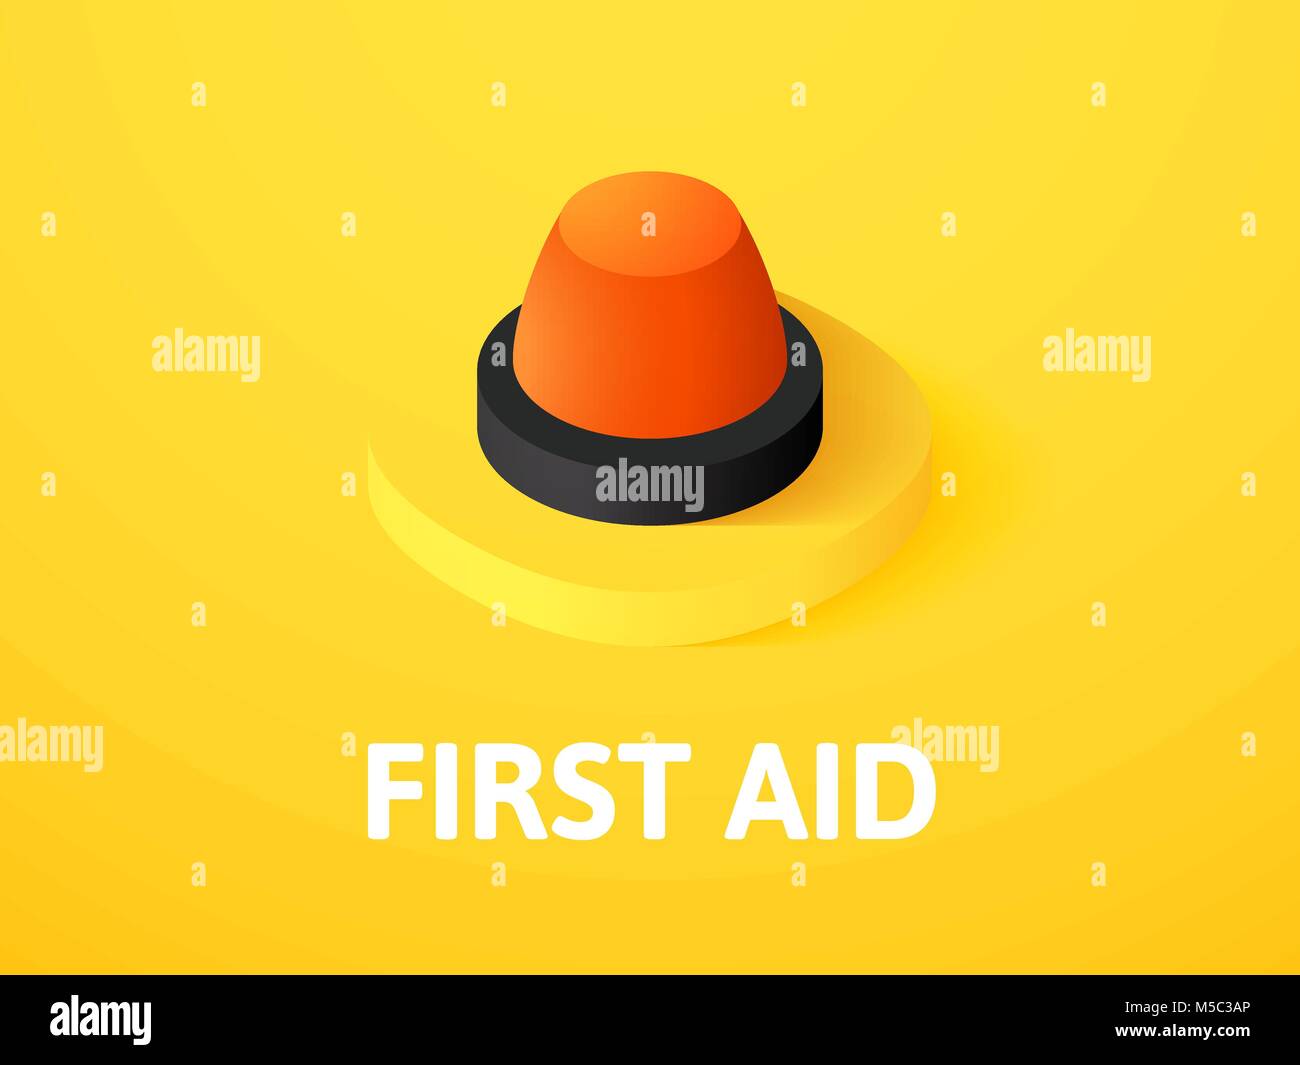 First aid isometric icon, isolated on color background Stock Vector